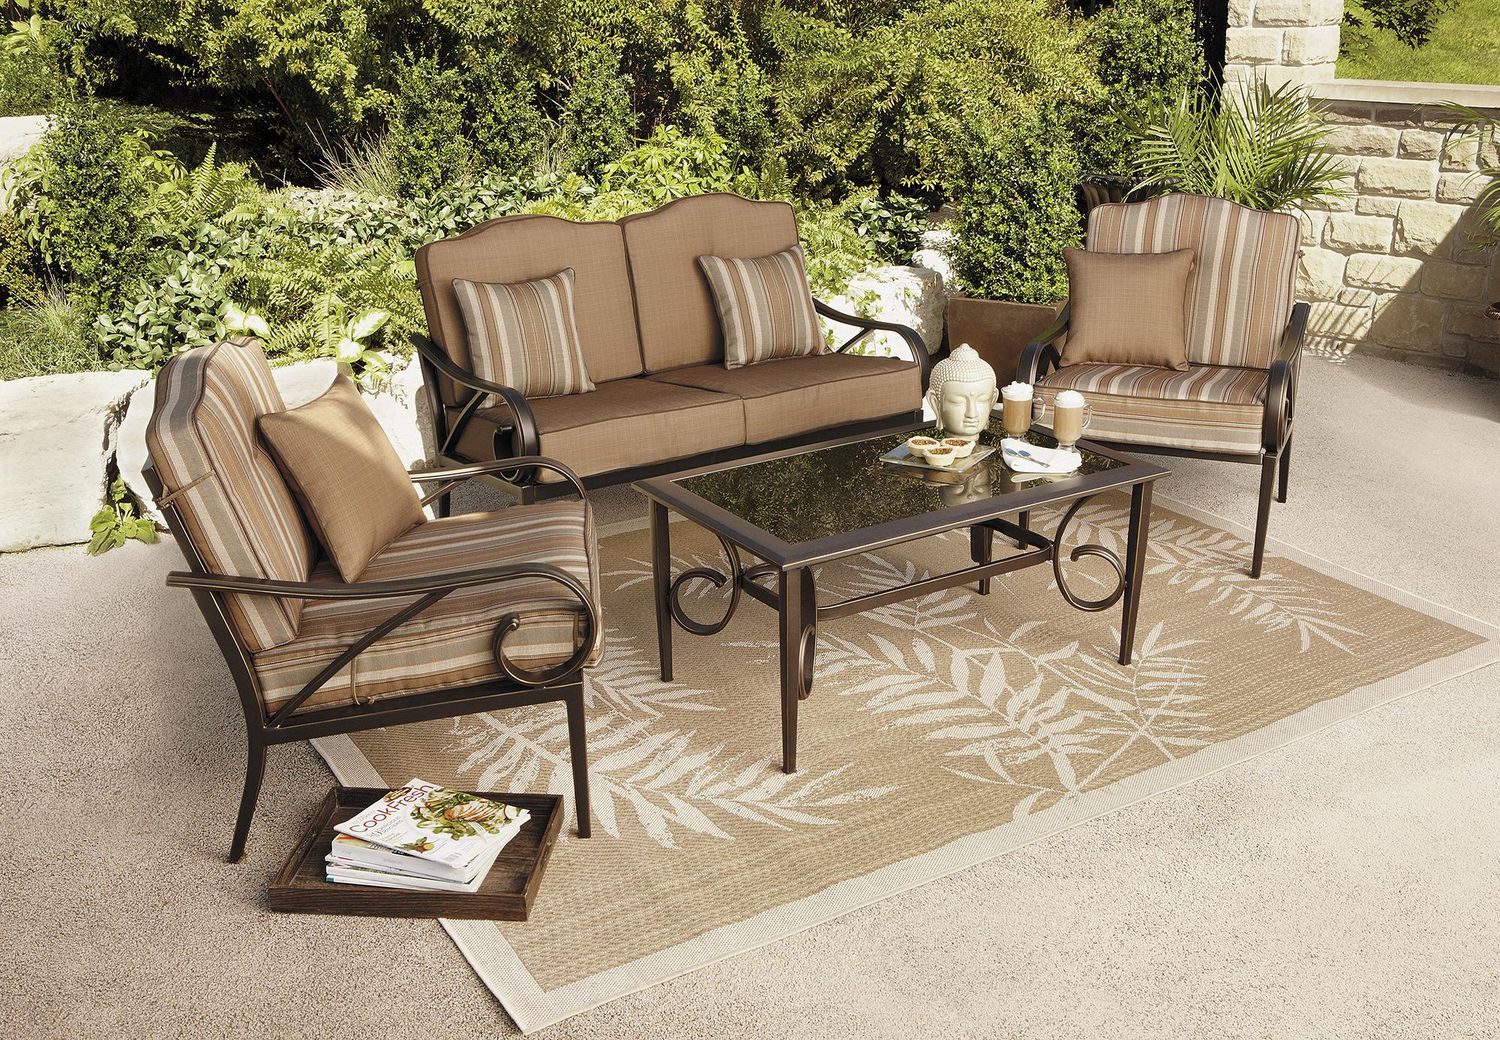 Hometrends Isabella 4 Piece Cushioned Conversation Set Canada - Isabella 4 Piece Patio Conversation Set